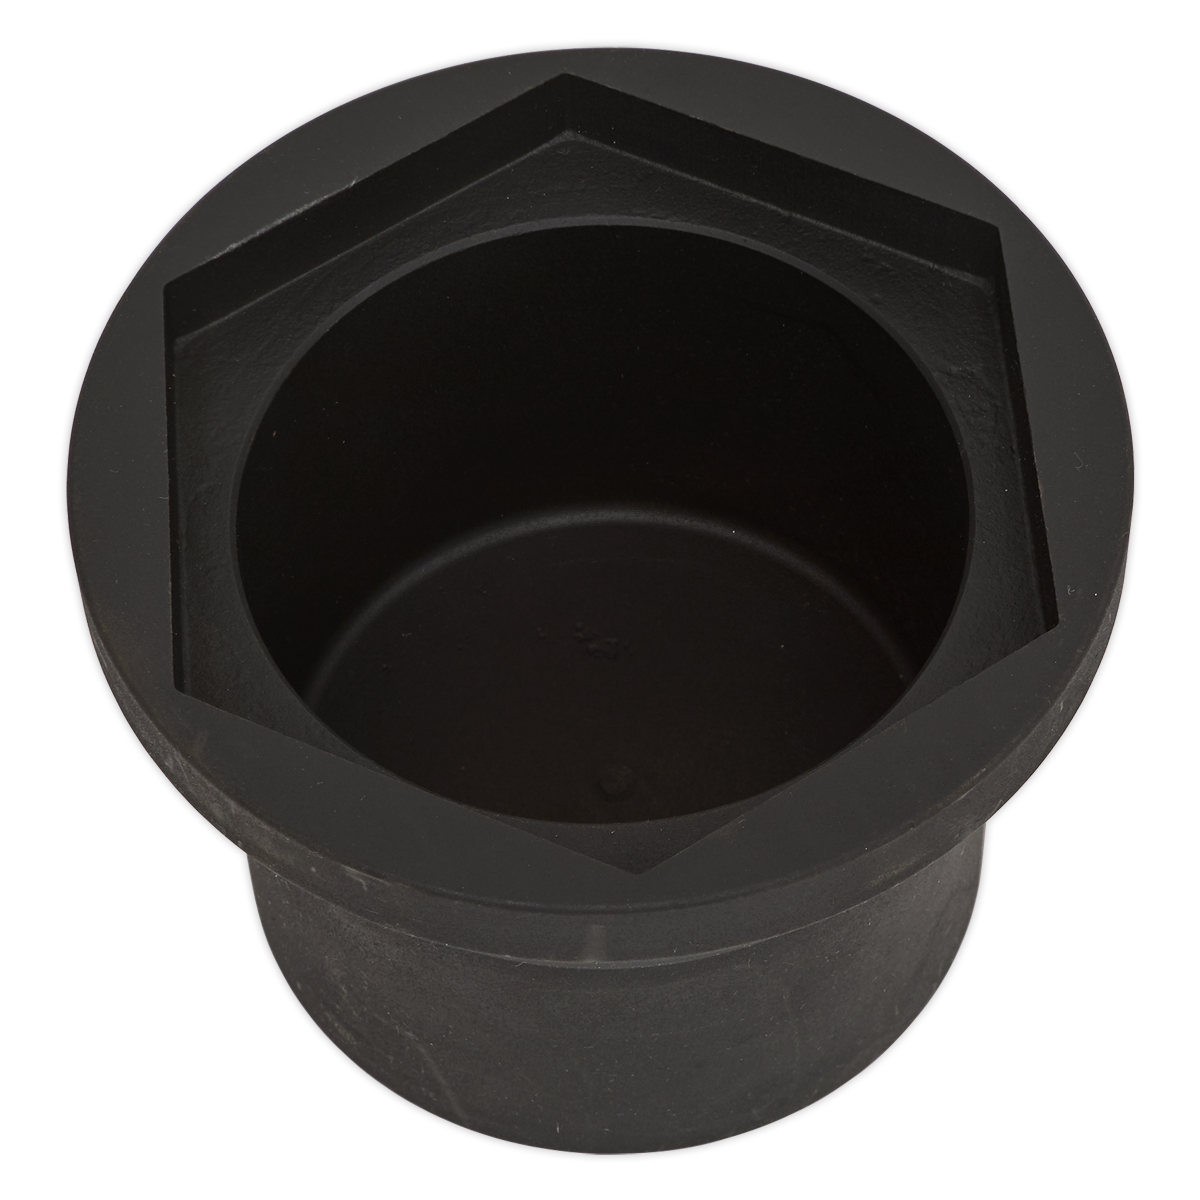 Axle Nut Socket - Iveco 98mm 36mm Hex Drive